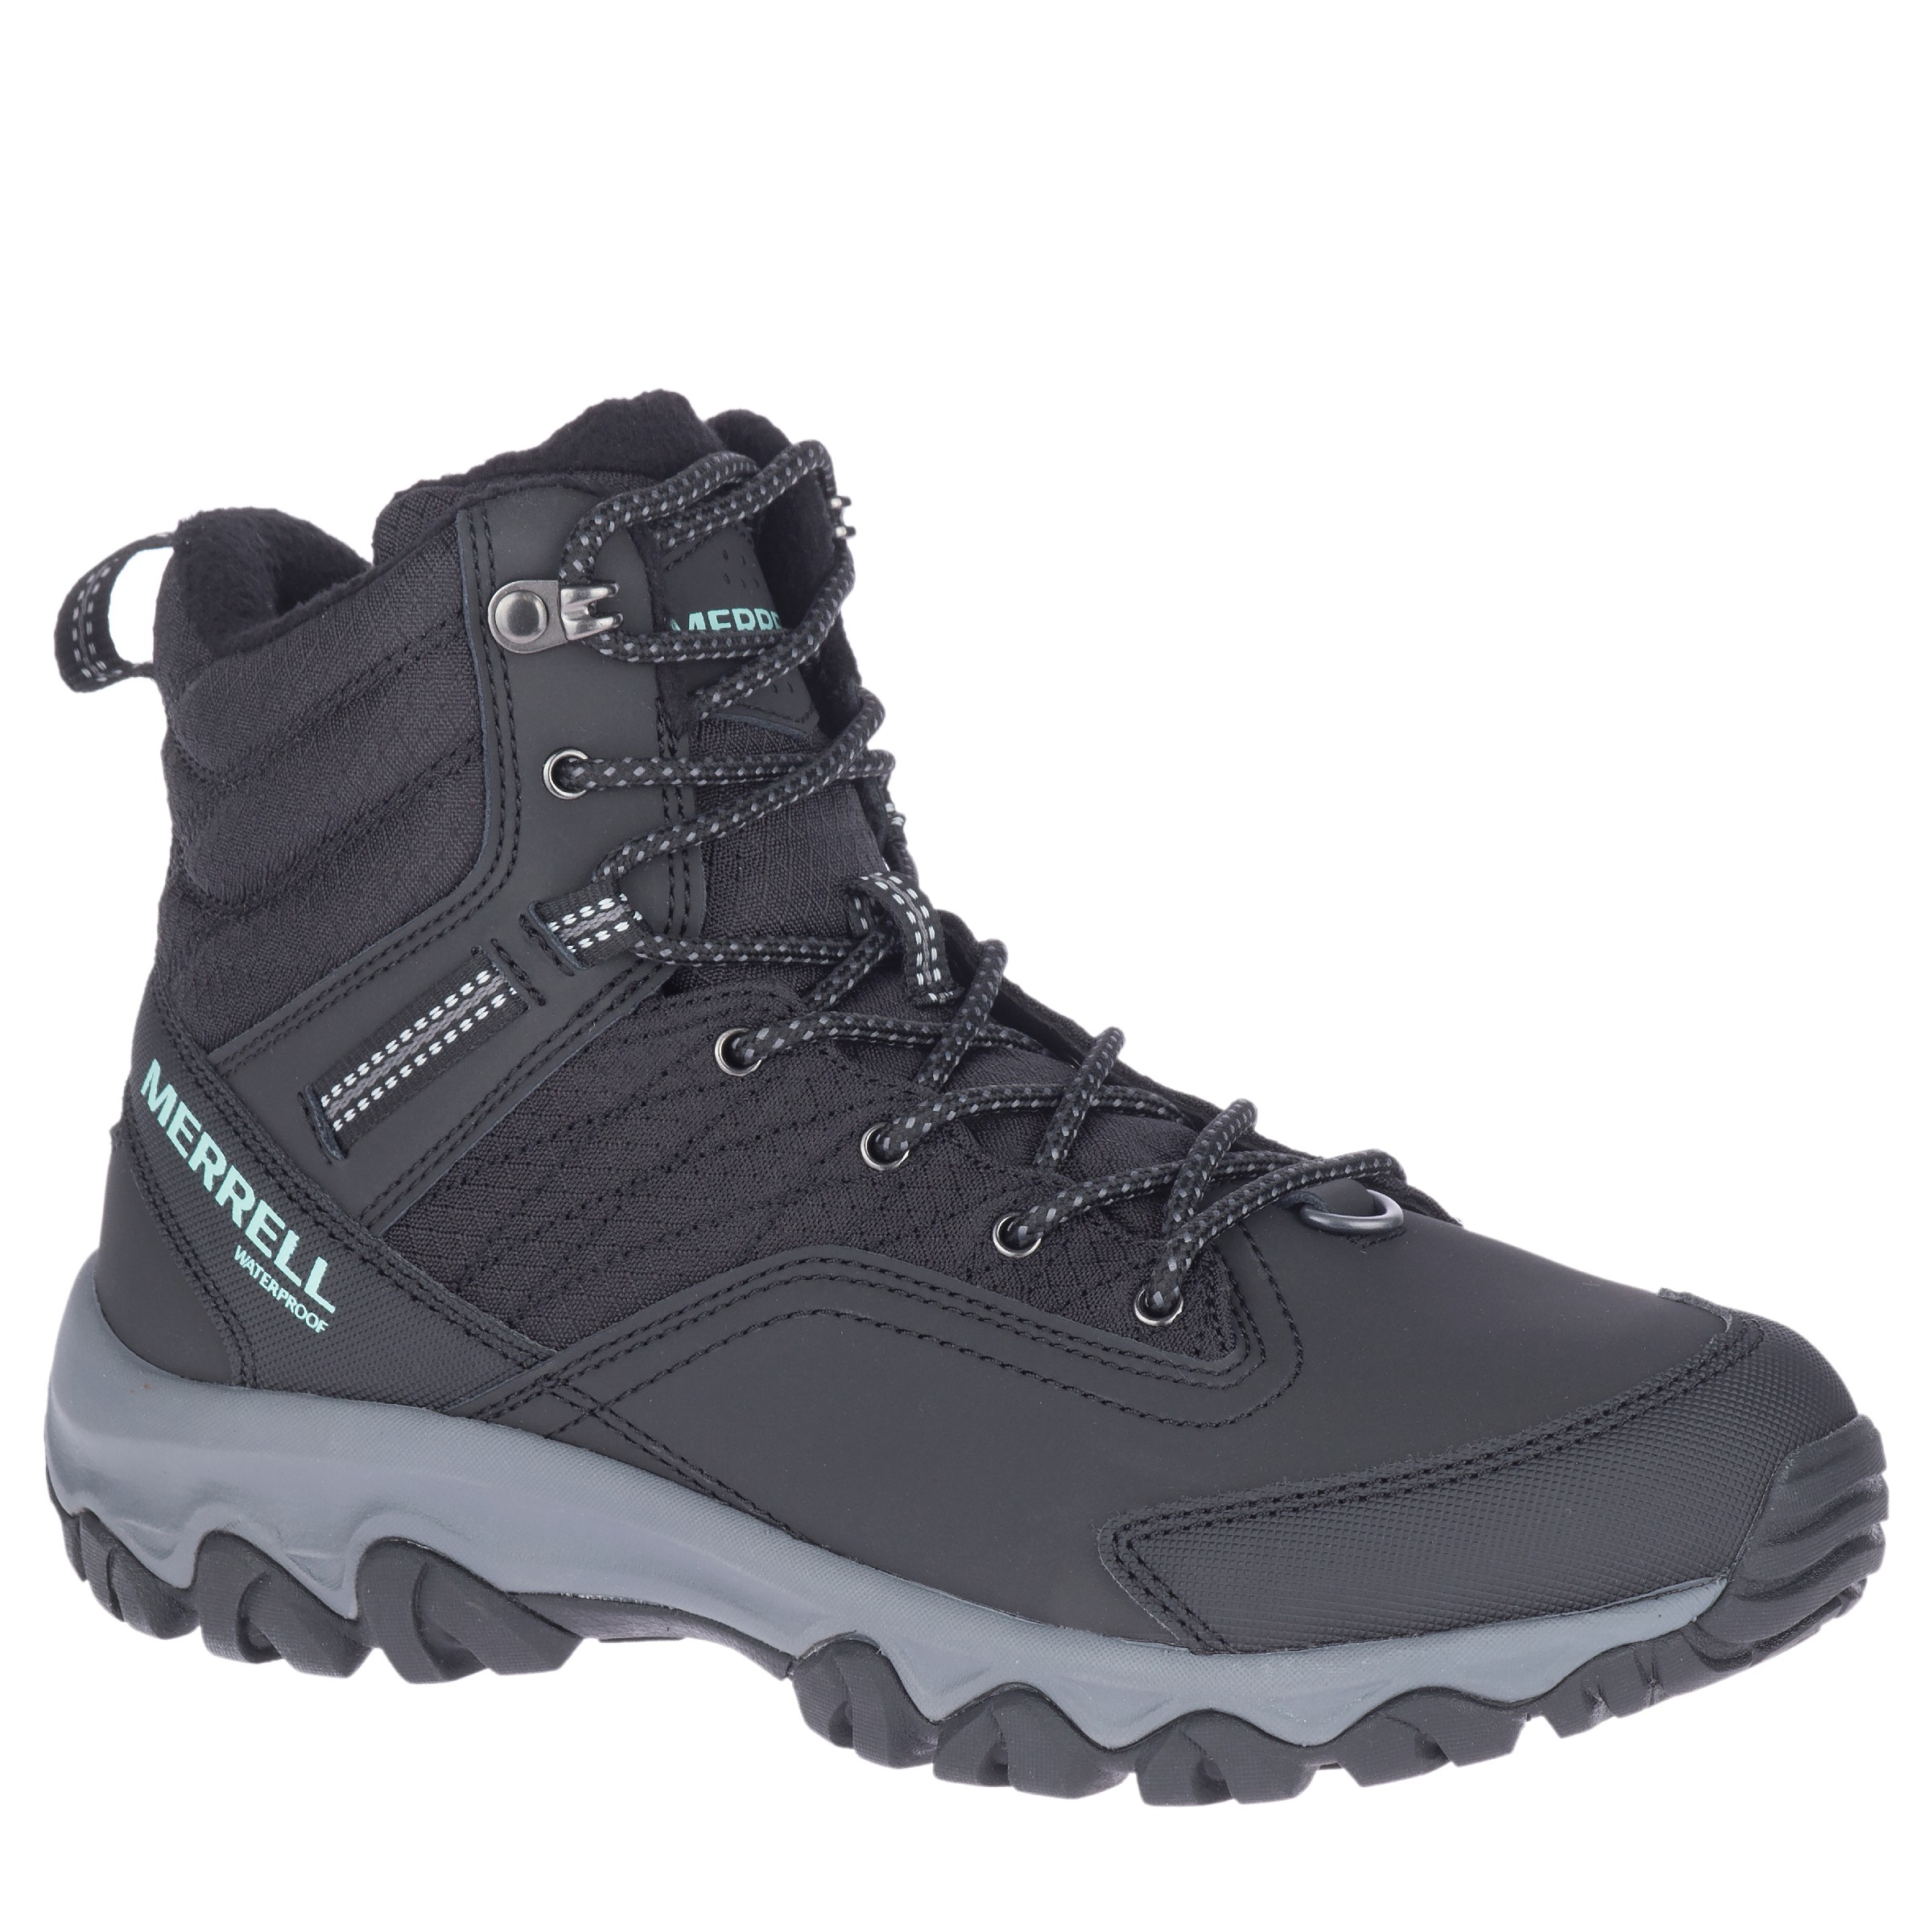 Women's Thermo Akita Mid Waterproof Cold Weather Boot